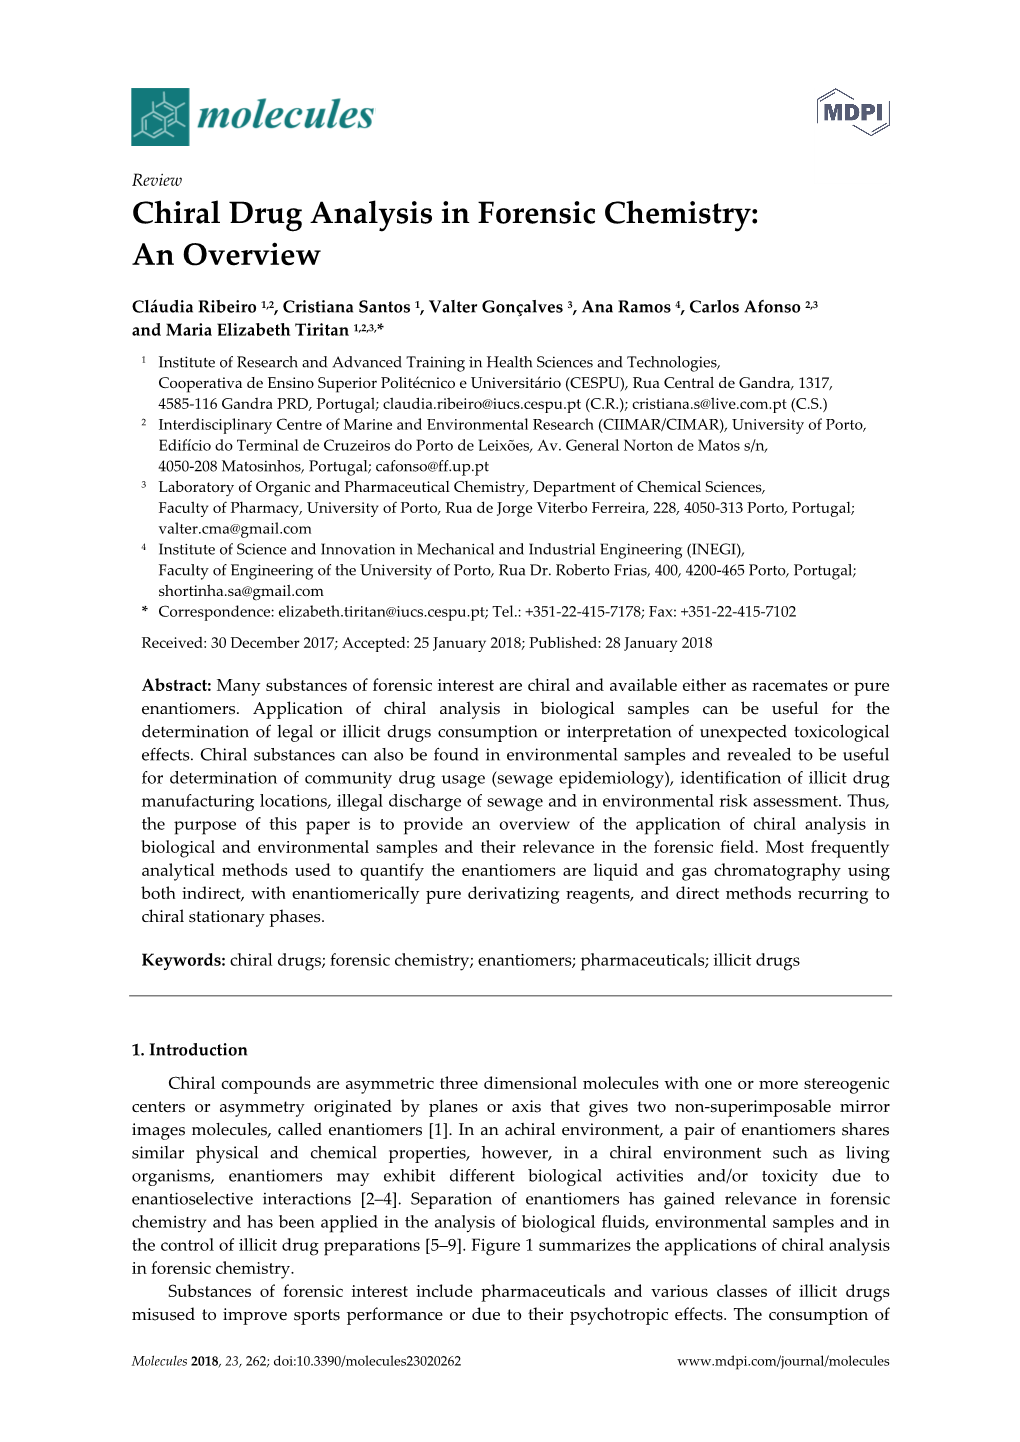 Chiral Drug Analysis in Forensic Chemistry: an Overview